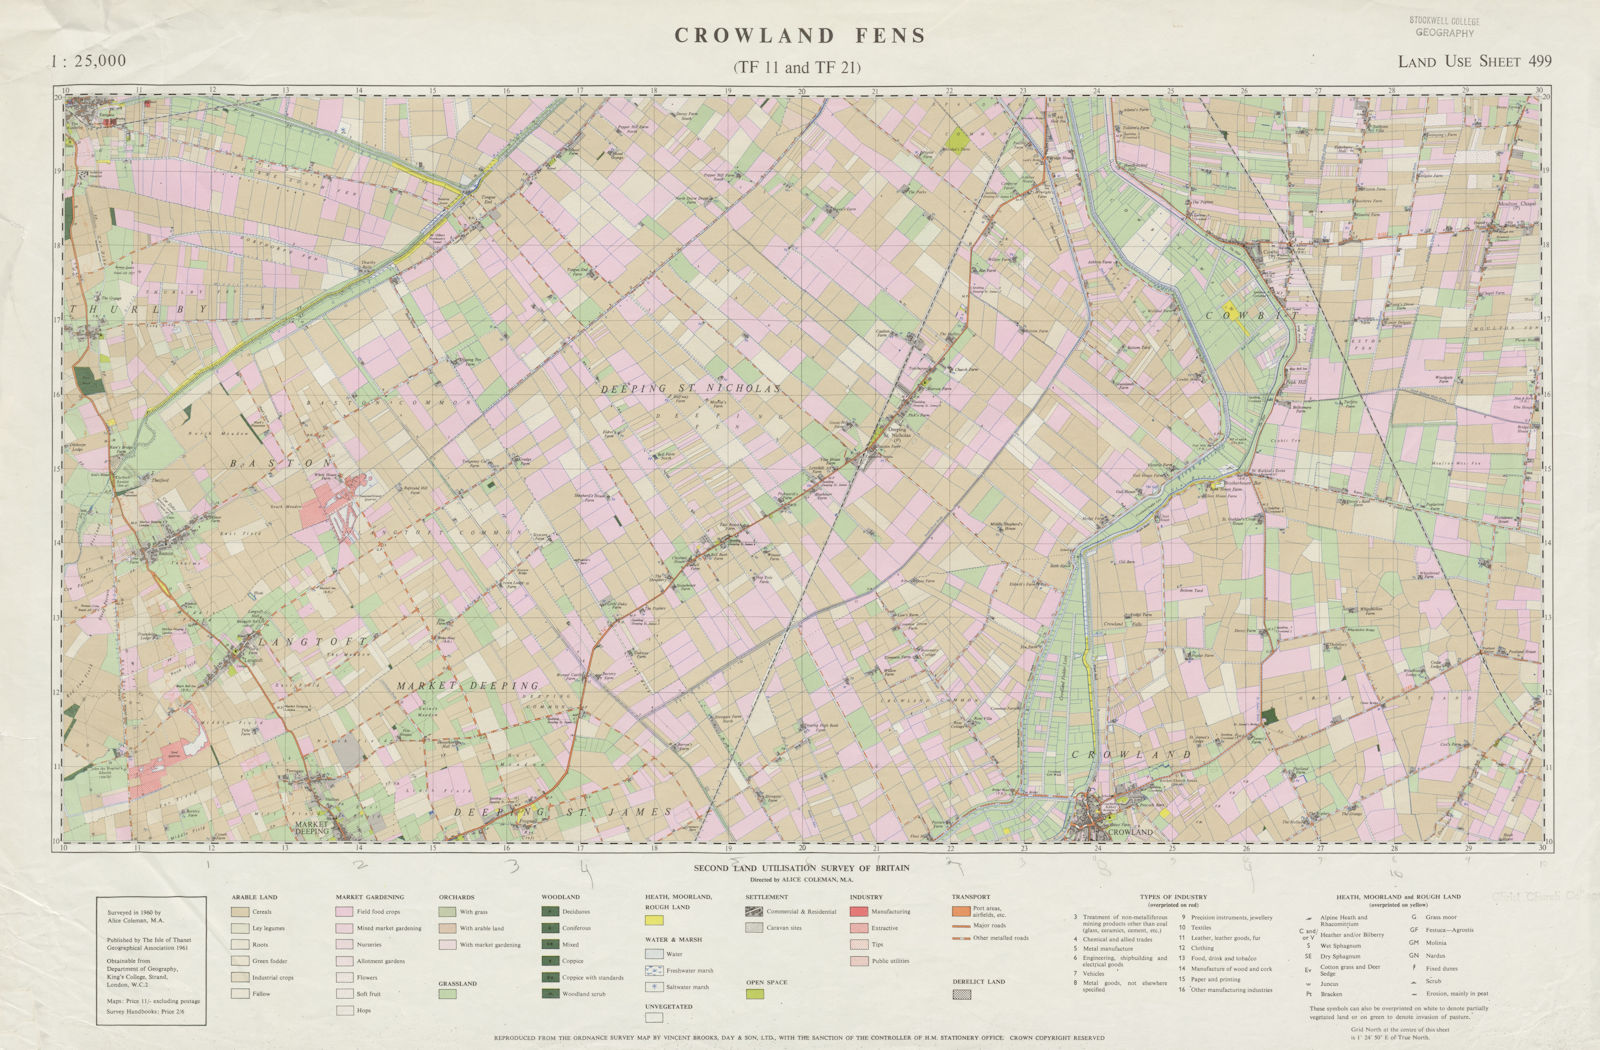 Associate Product Crowland Fens (TF11 and TF21) Land Use Survey Sheet 499. 85x55cm 1961 old map